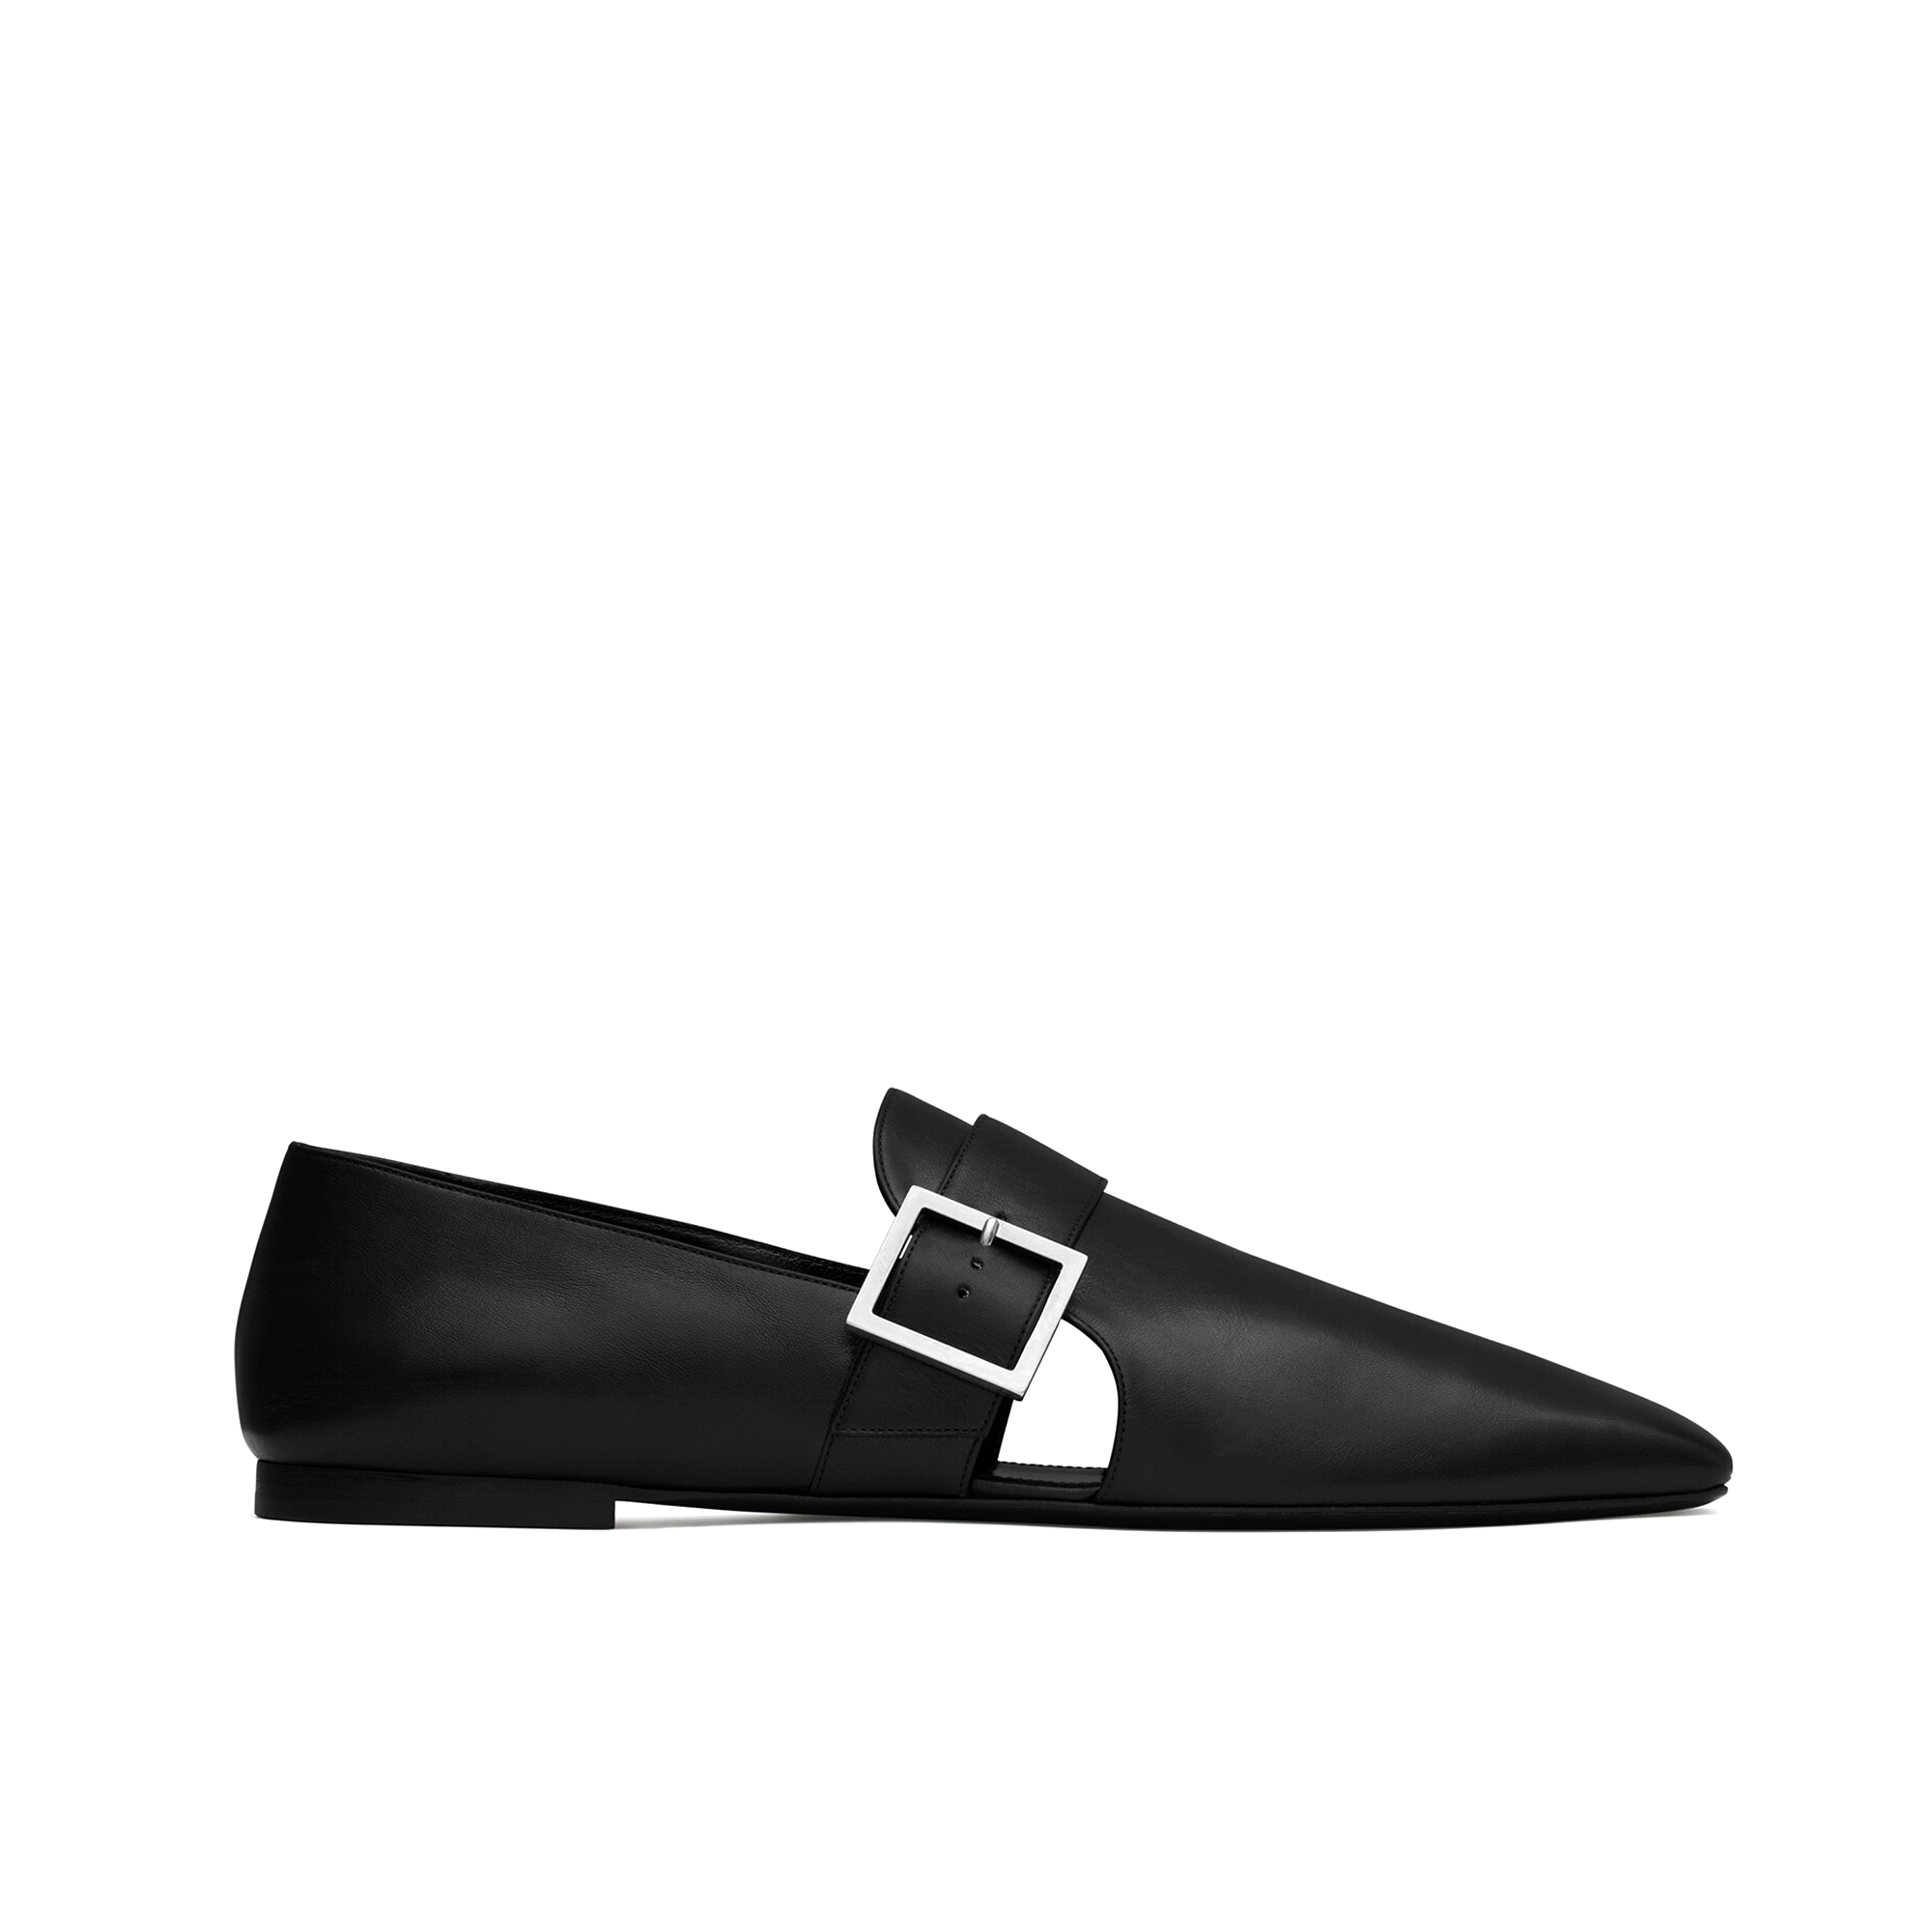 Mamie Frye Loafers